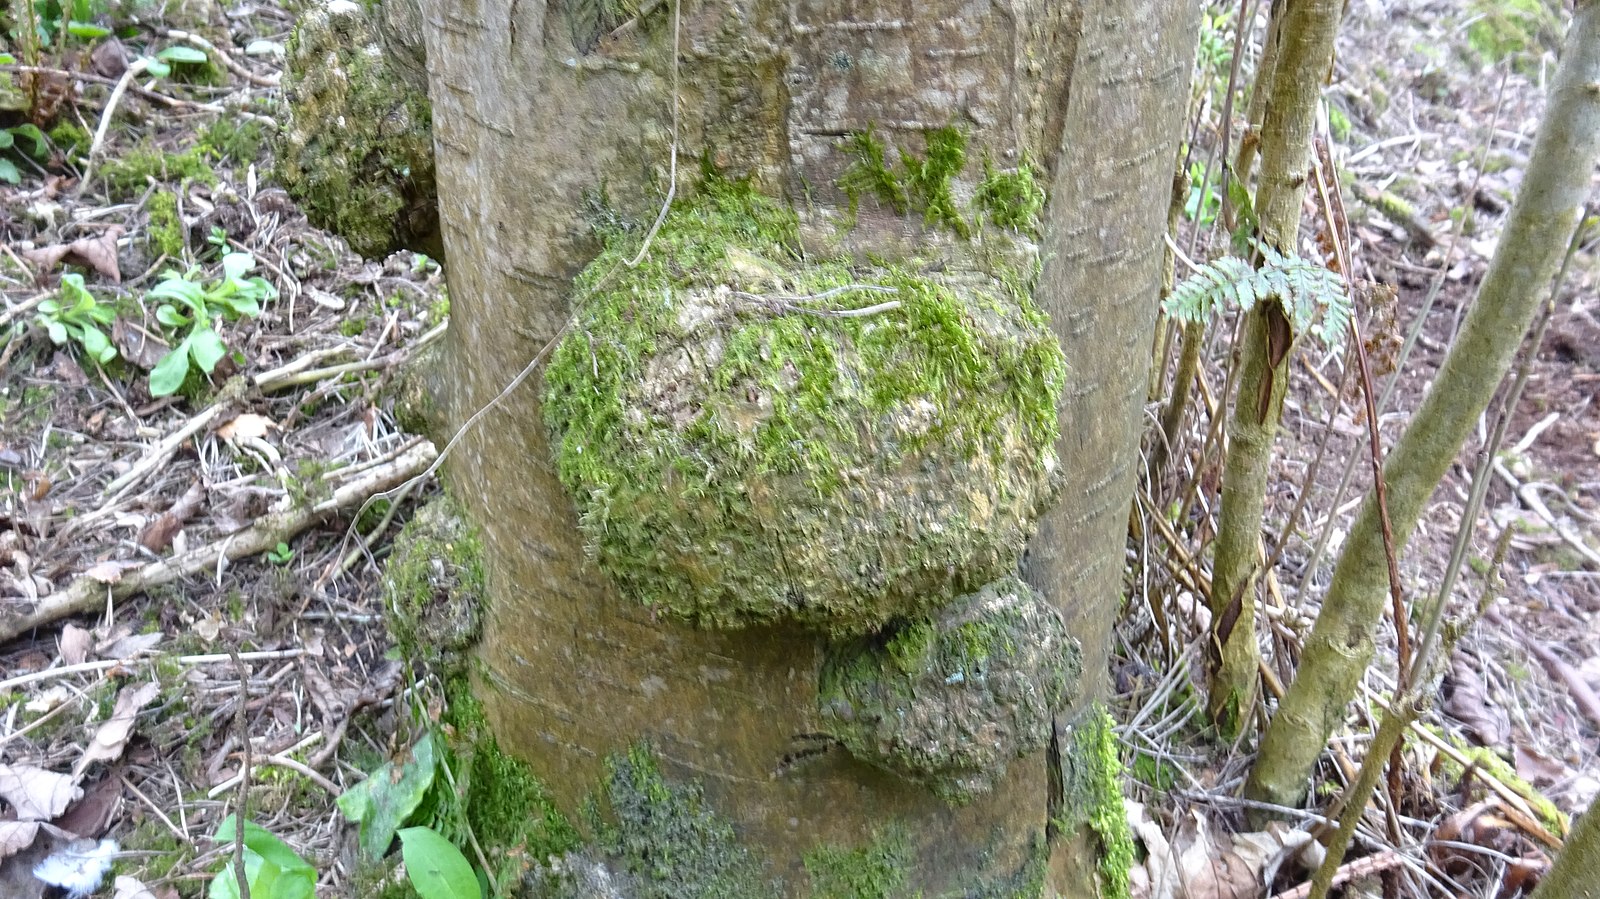 a spherical growth on the trunk of a tree